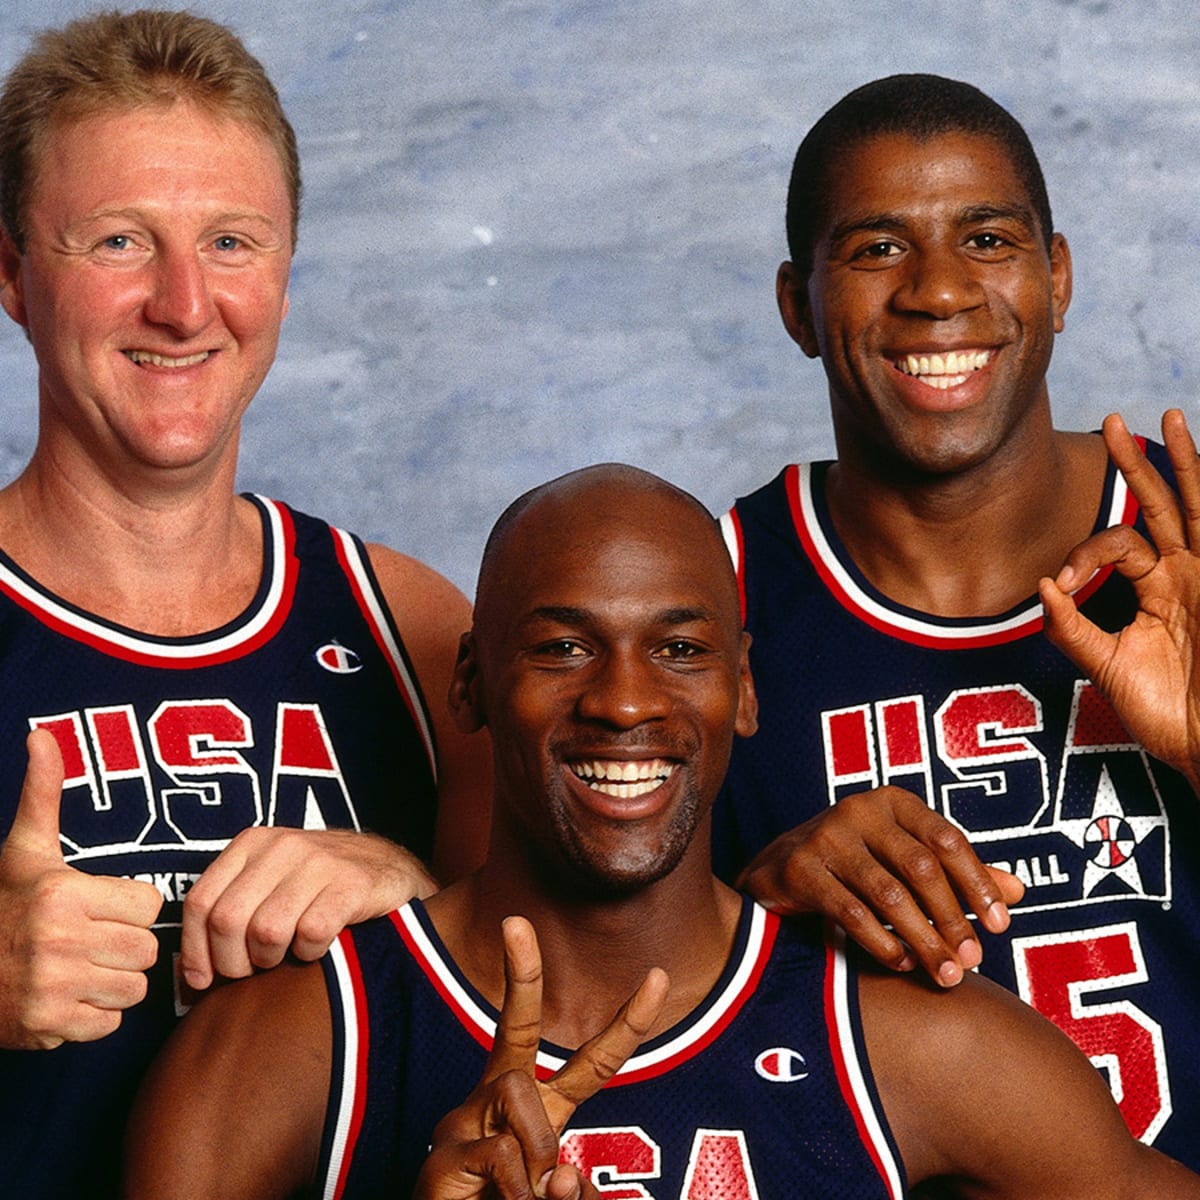 Who would win in a pick-up game: '92 Dream Team or 2012 Redeem Team?